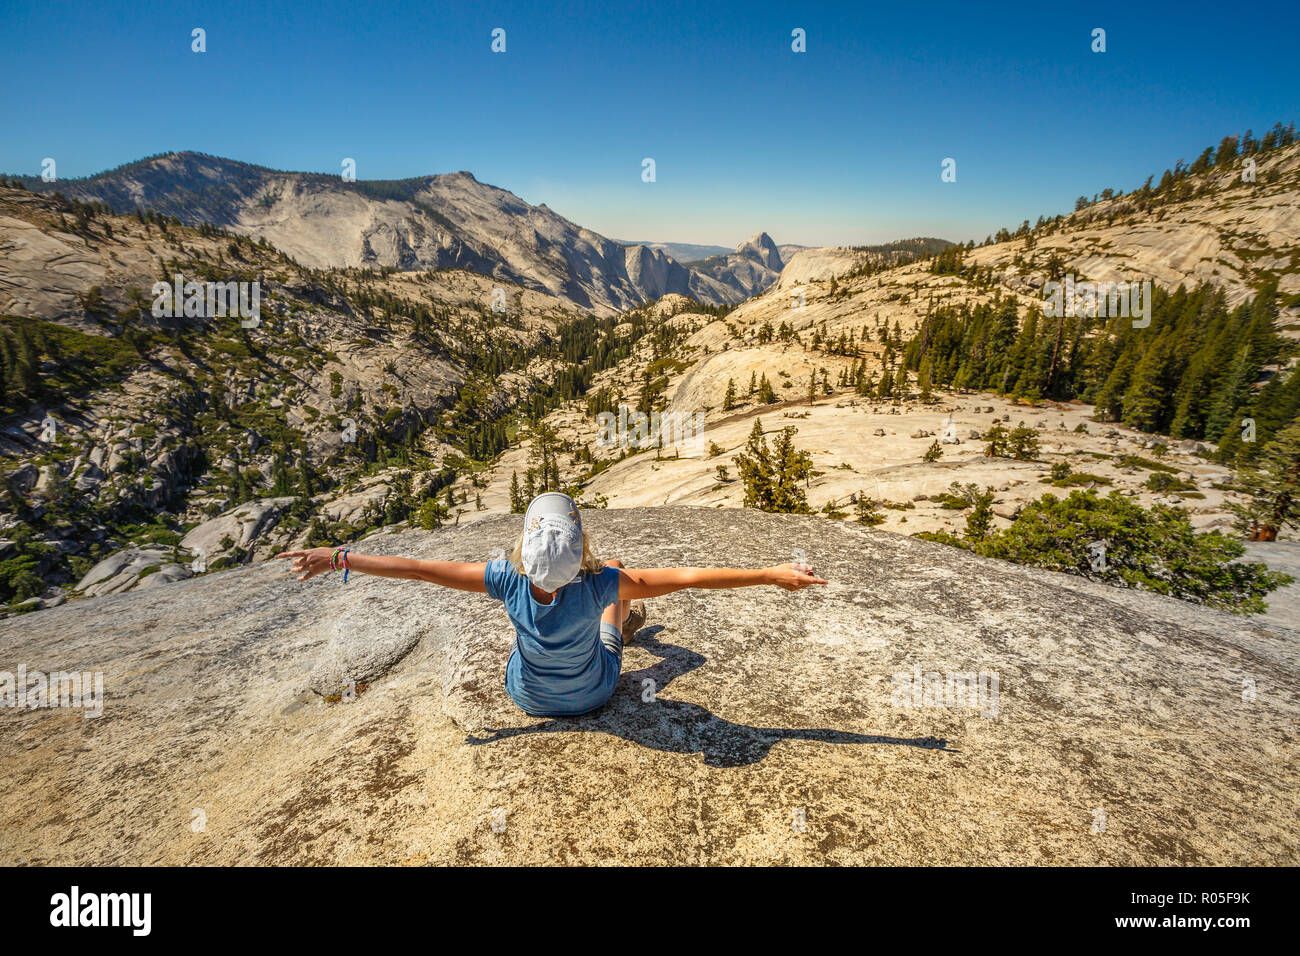 Hiking enthusiastic woman relaxing at Olmsted Point and looking the north side Half Dome. Tired hiker resting lying down outdoors taking a break from hiking. Yosemite National Park, California, USA Stock Photo